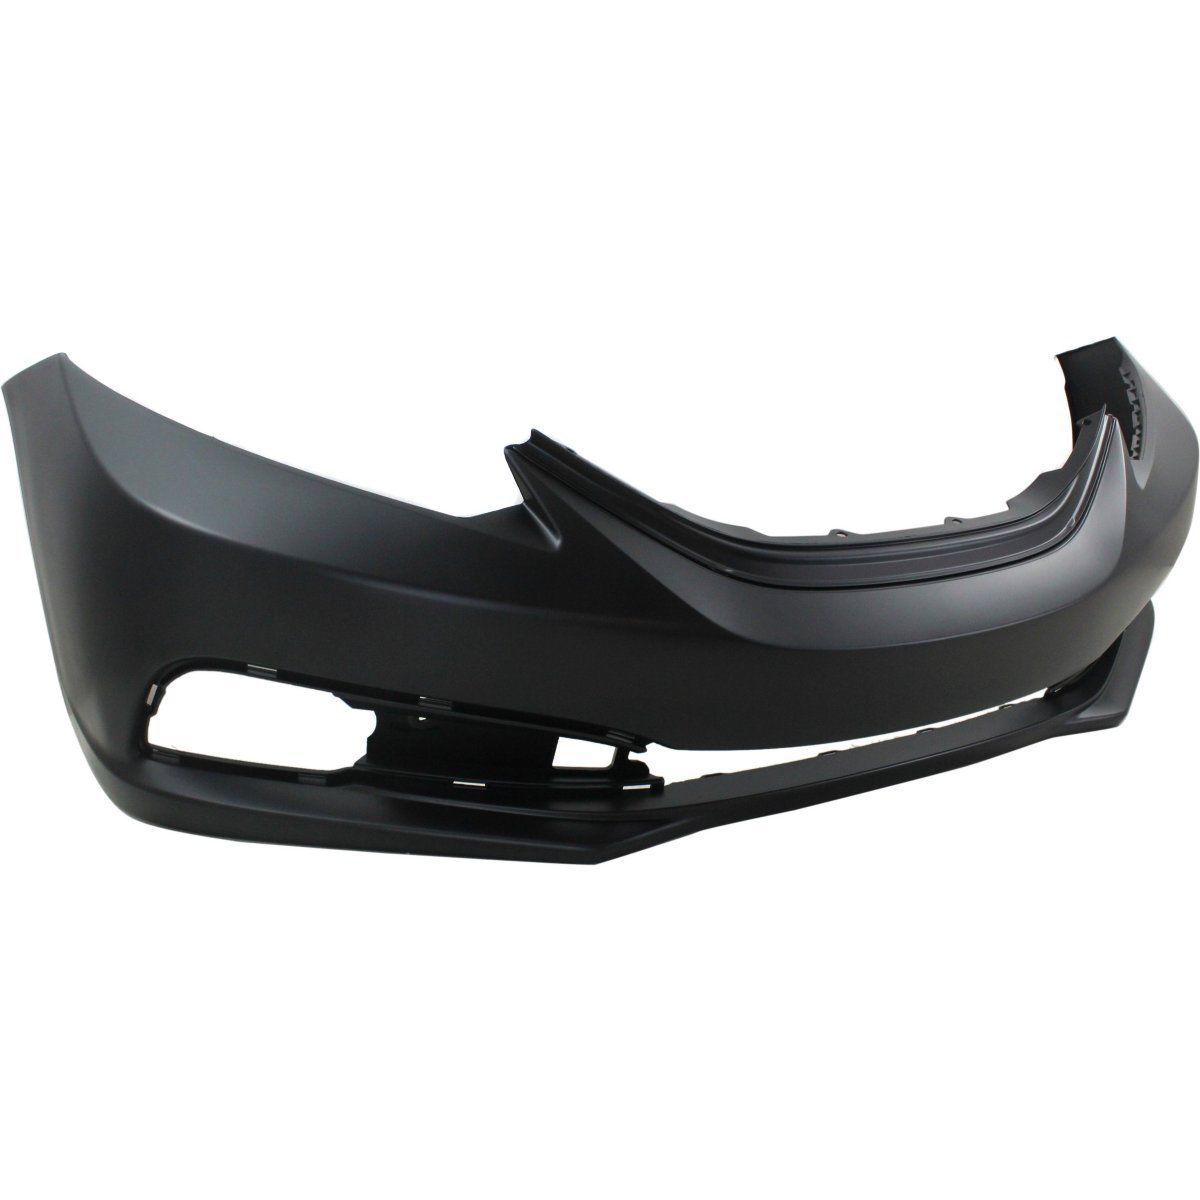 2013-2015 HONDA CIVIC Front Bumper Cover SEDAN / HYBRID Painted to Match